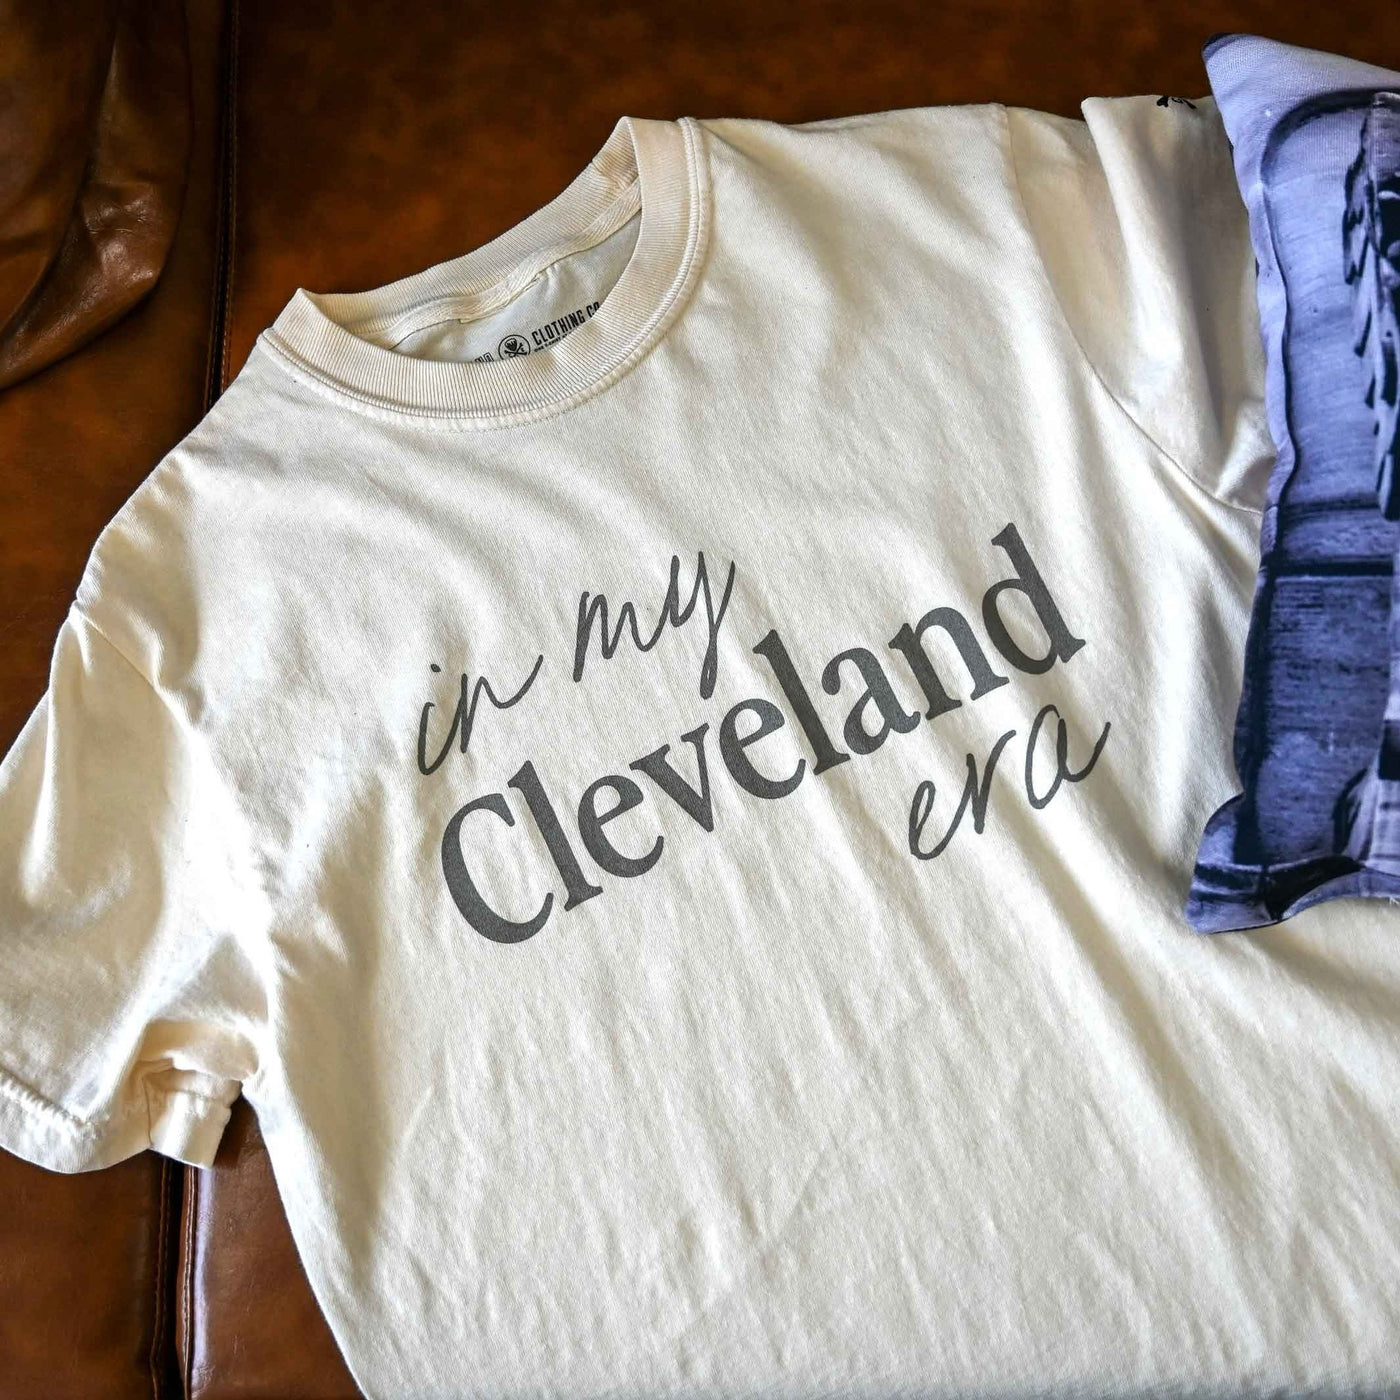 Shop for Unique Cleveland Mother’s Day Gifts